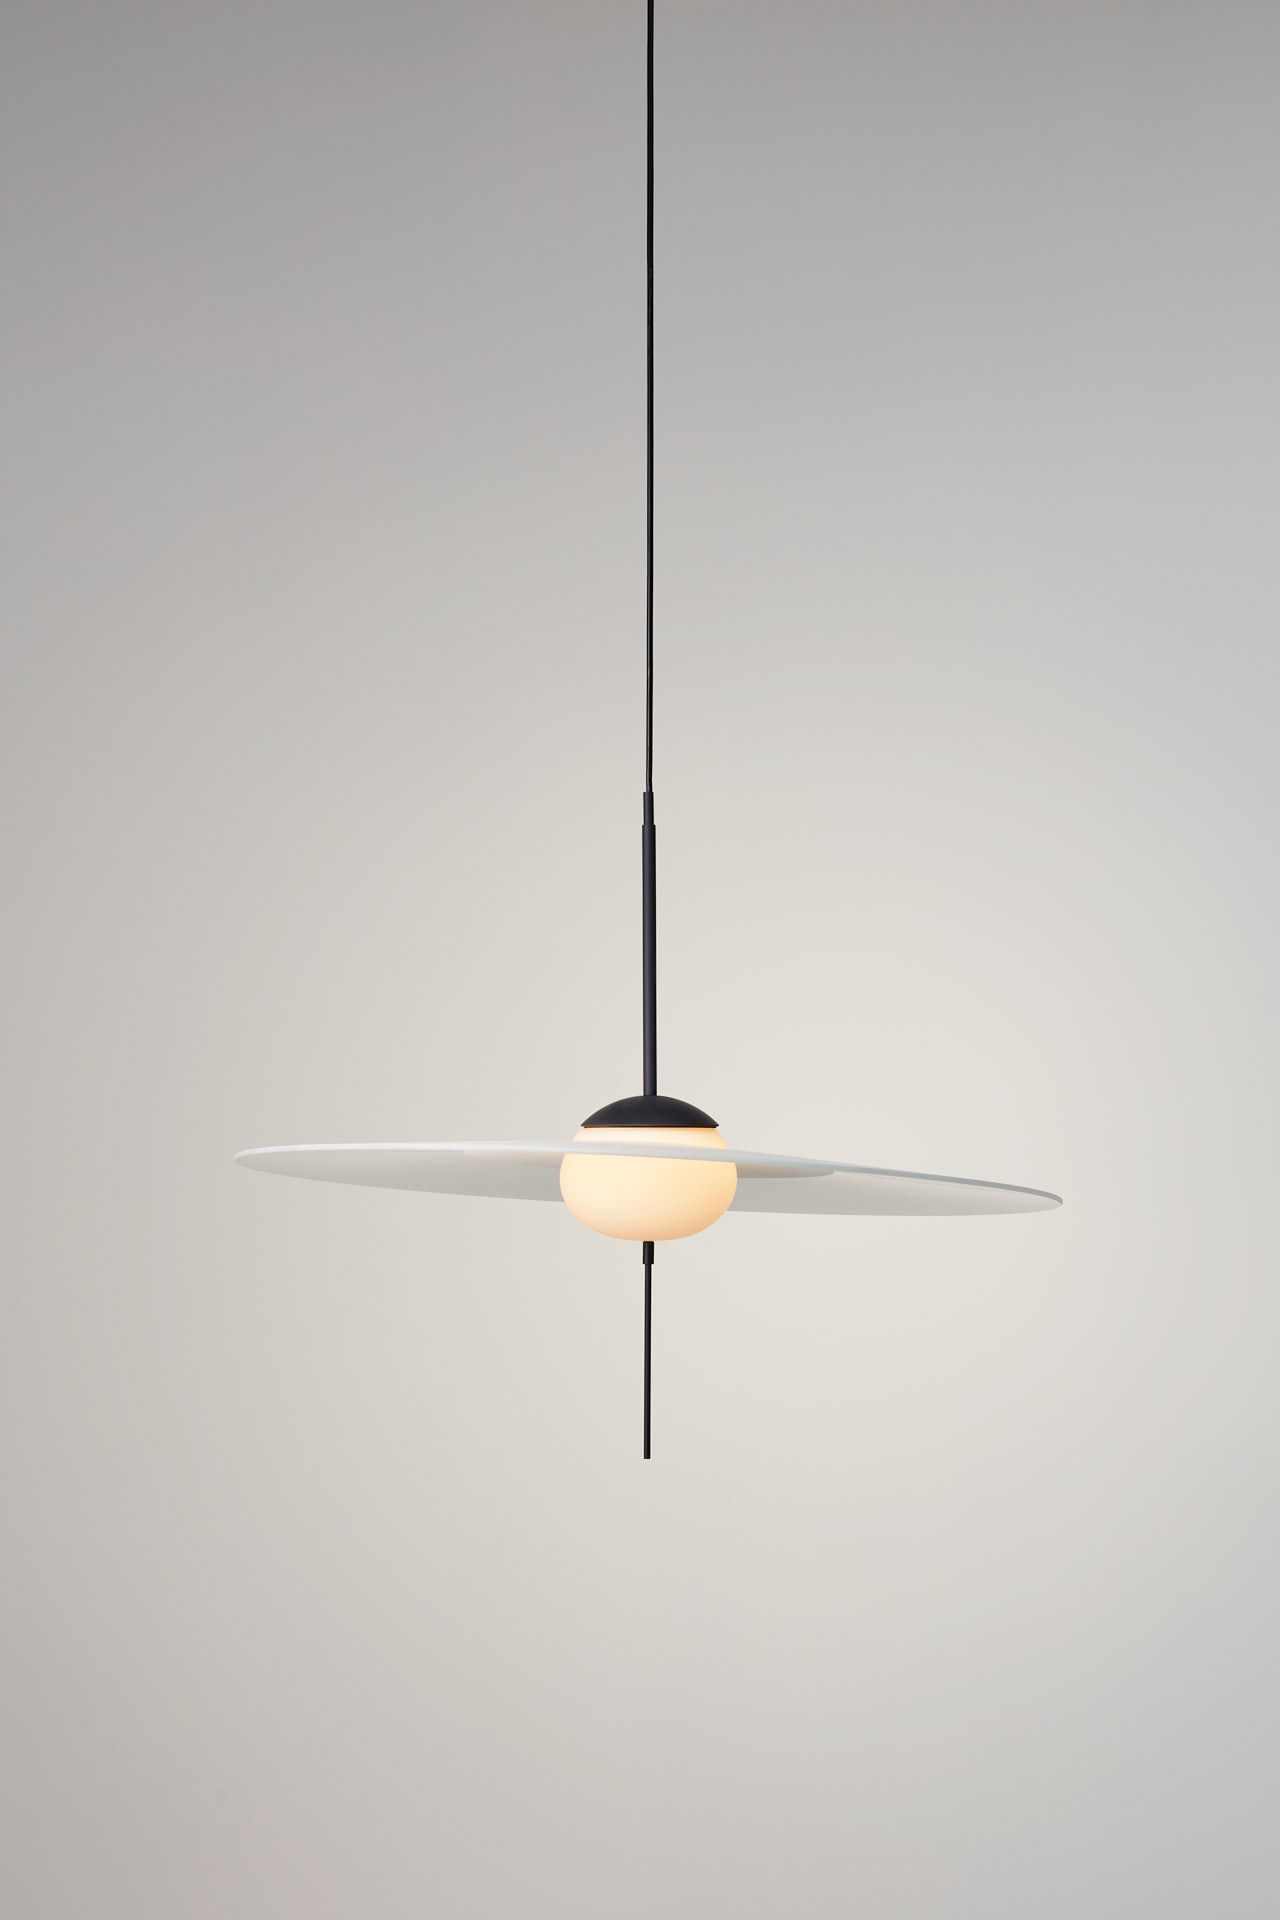 Mono by VANTOT, playful glass light resembling Saturn with it's rings.